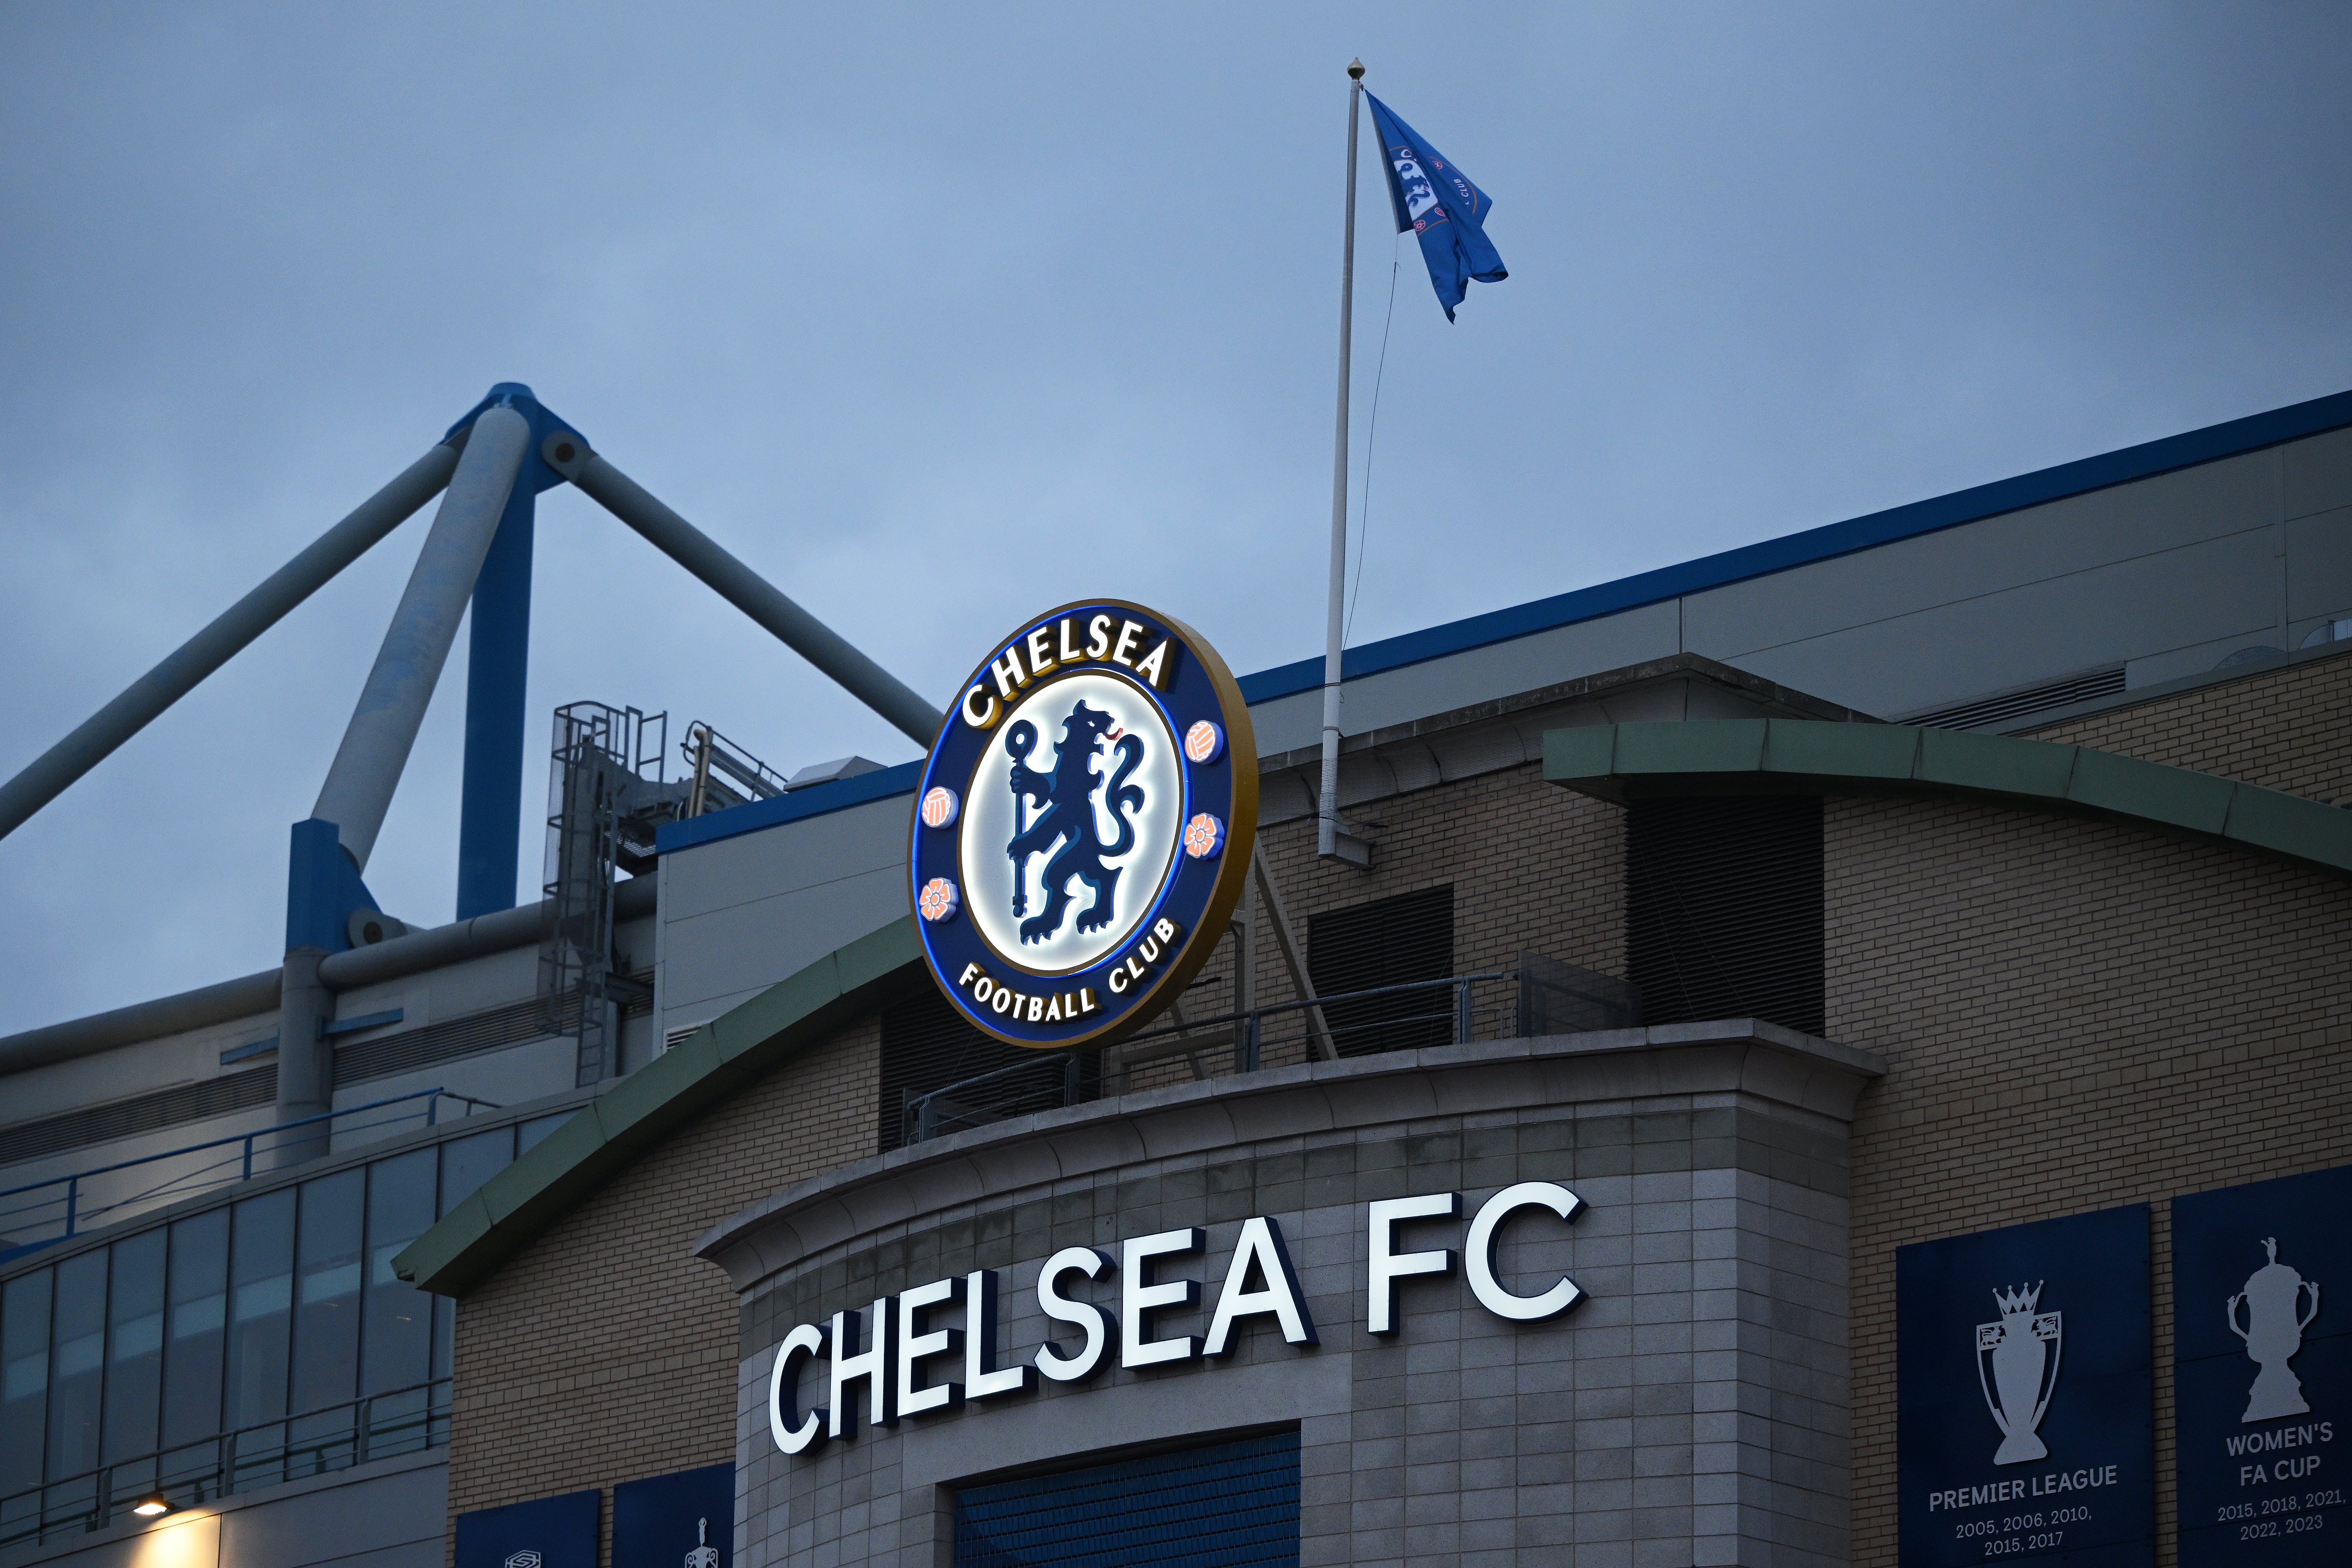 Chelsea announce losses for the previous financial year